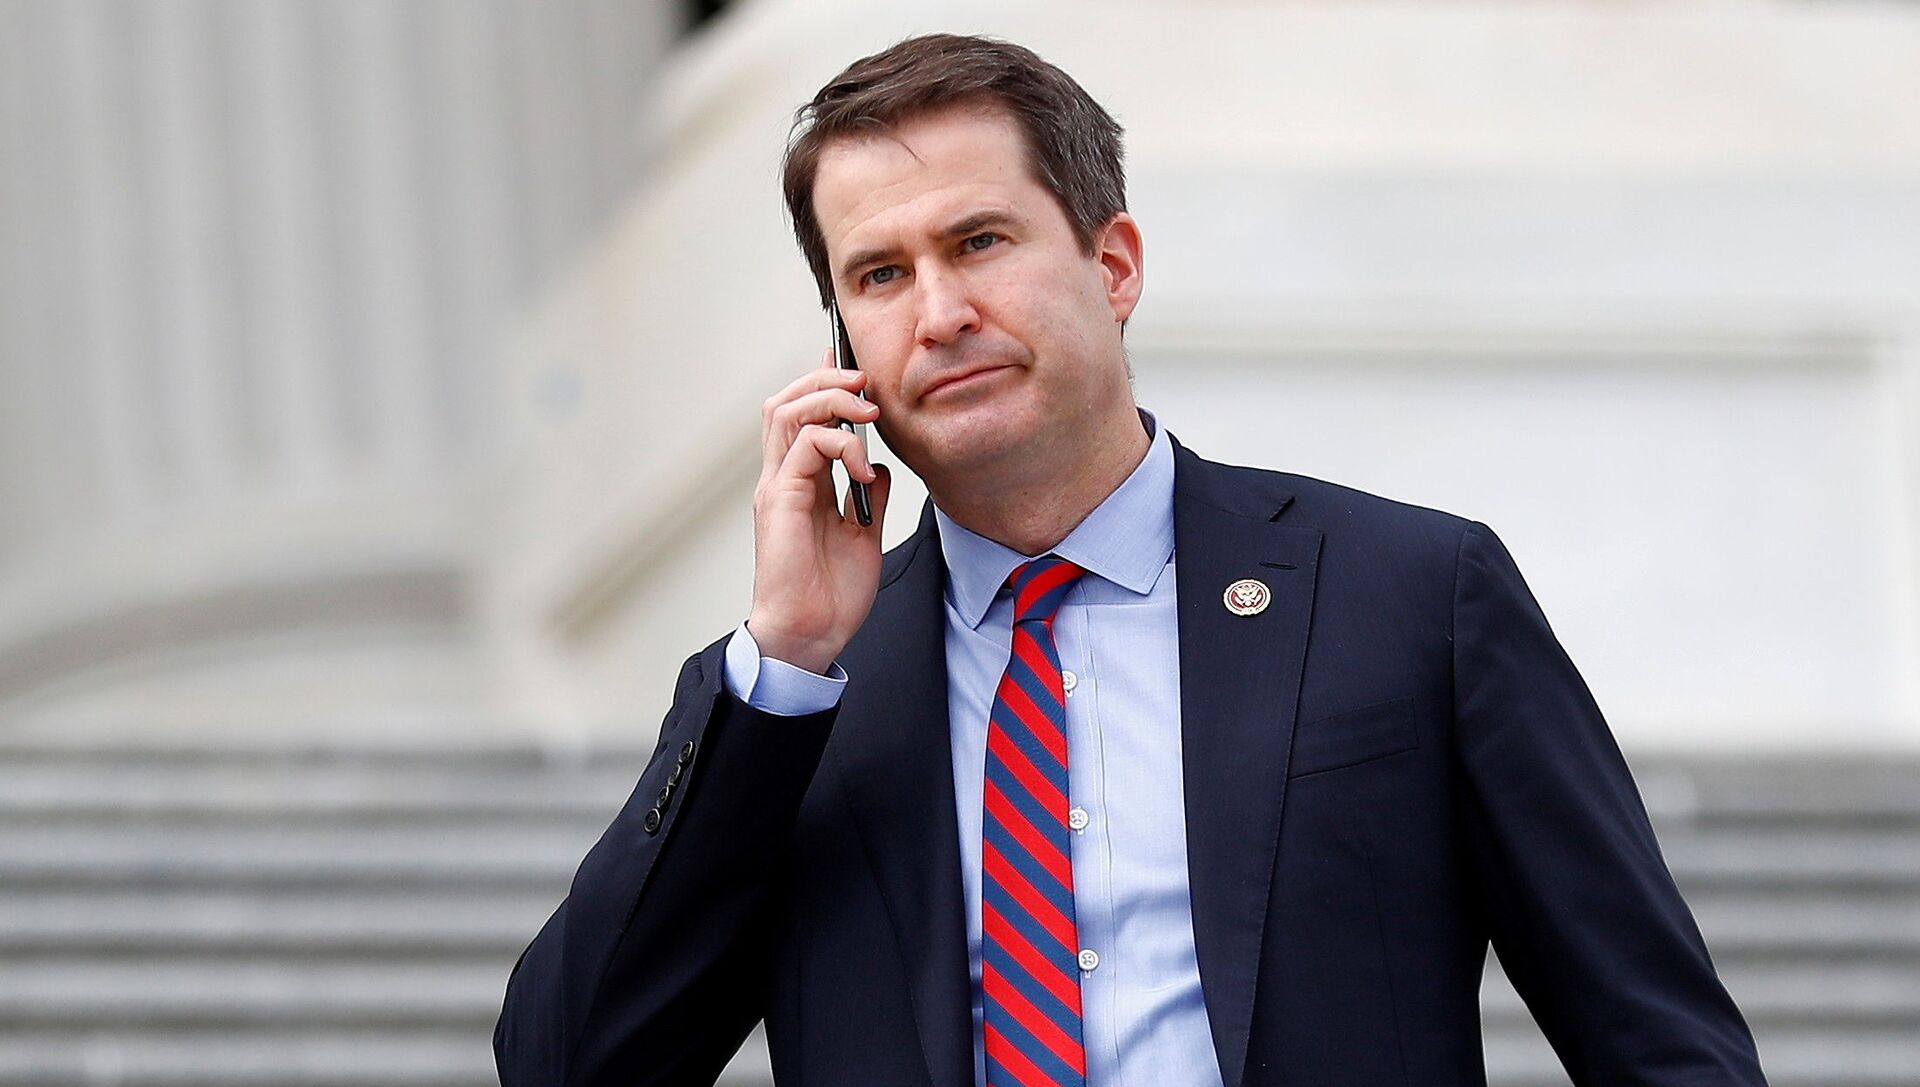 Rep. Seth Moulton (D-MA) descends down the House entrance stairs following the Friends of Ireland reception on Capitol Hill in Washington, U.S., March 12, 2020 - Sputnik International, 1920, 27.08.2021